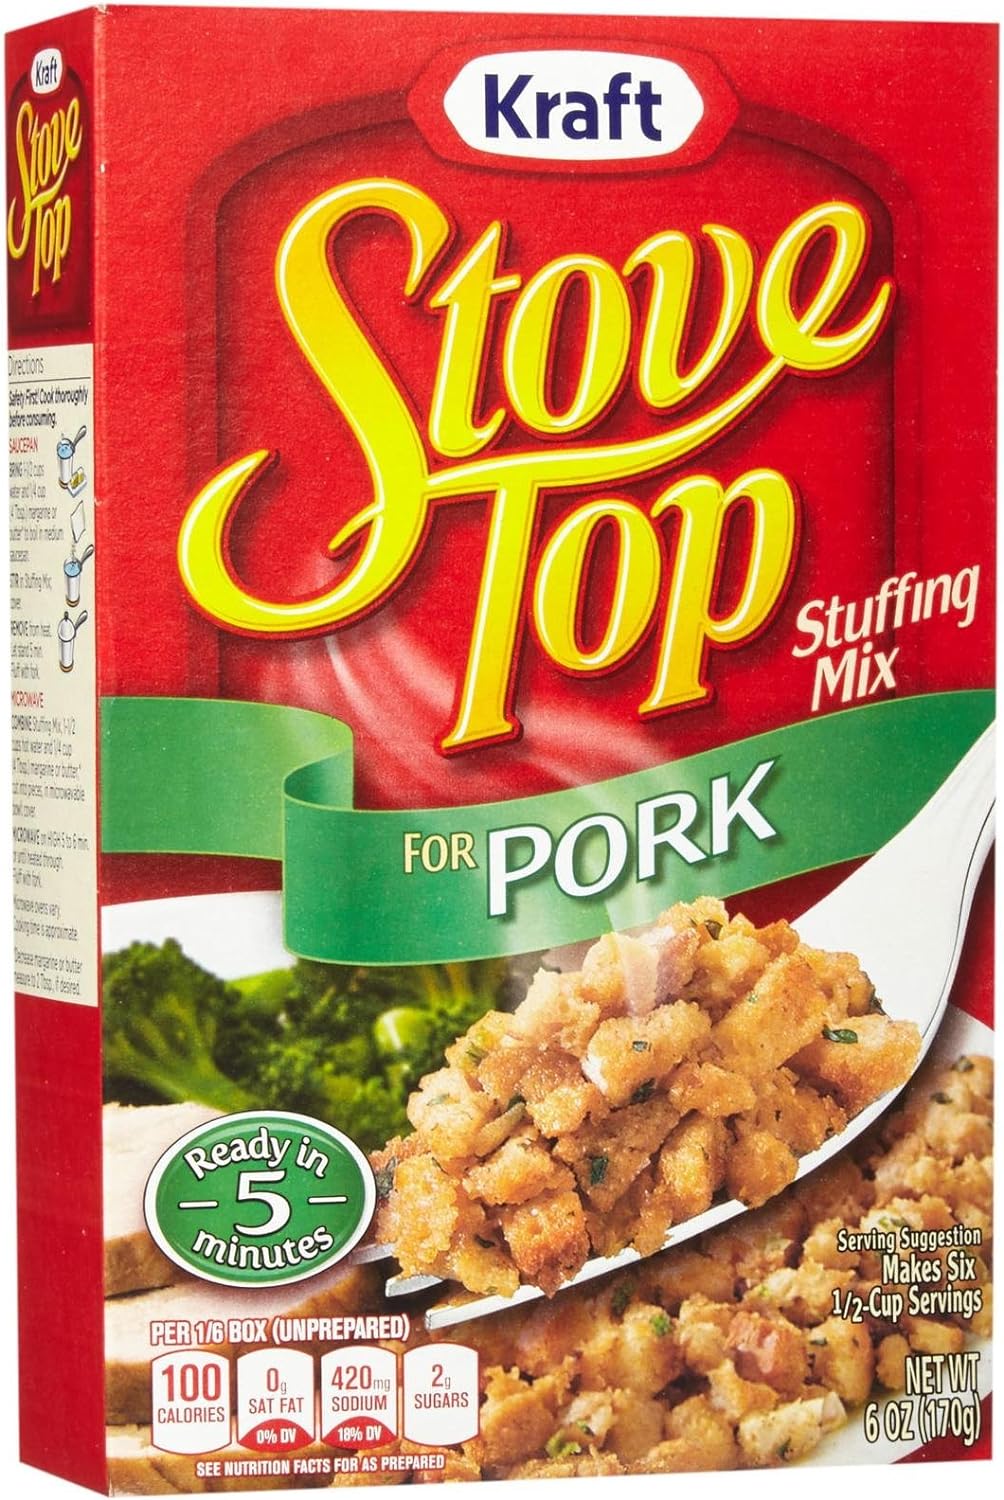 Stove Top Stuffing Mix for Pork 6 oz